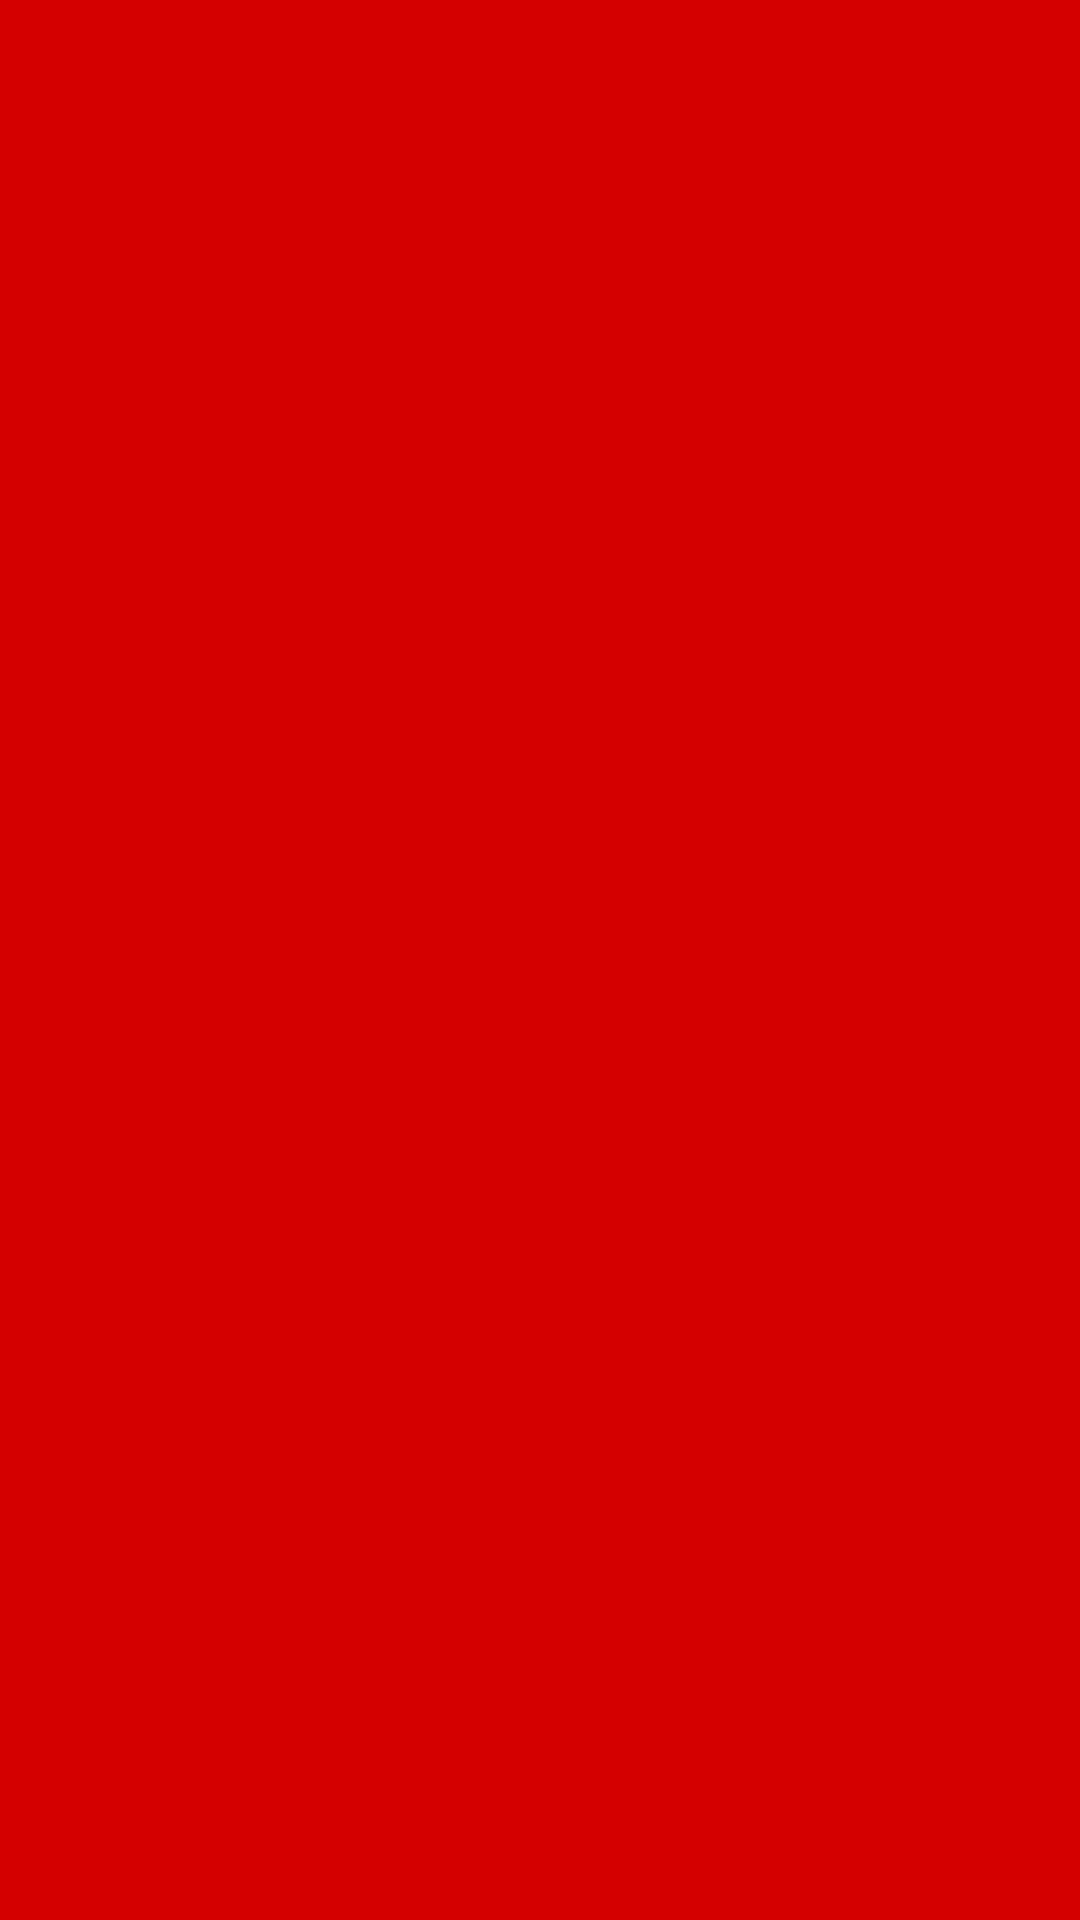 1080x1920 Rosso Corsa Solid Color Background